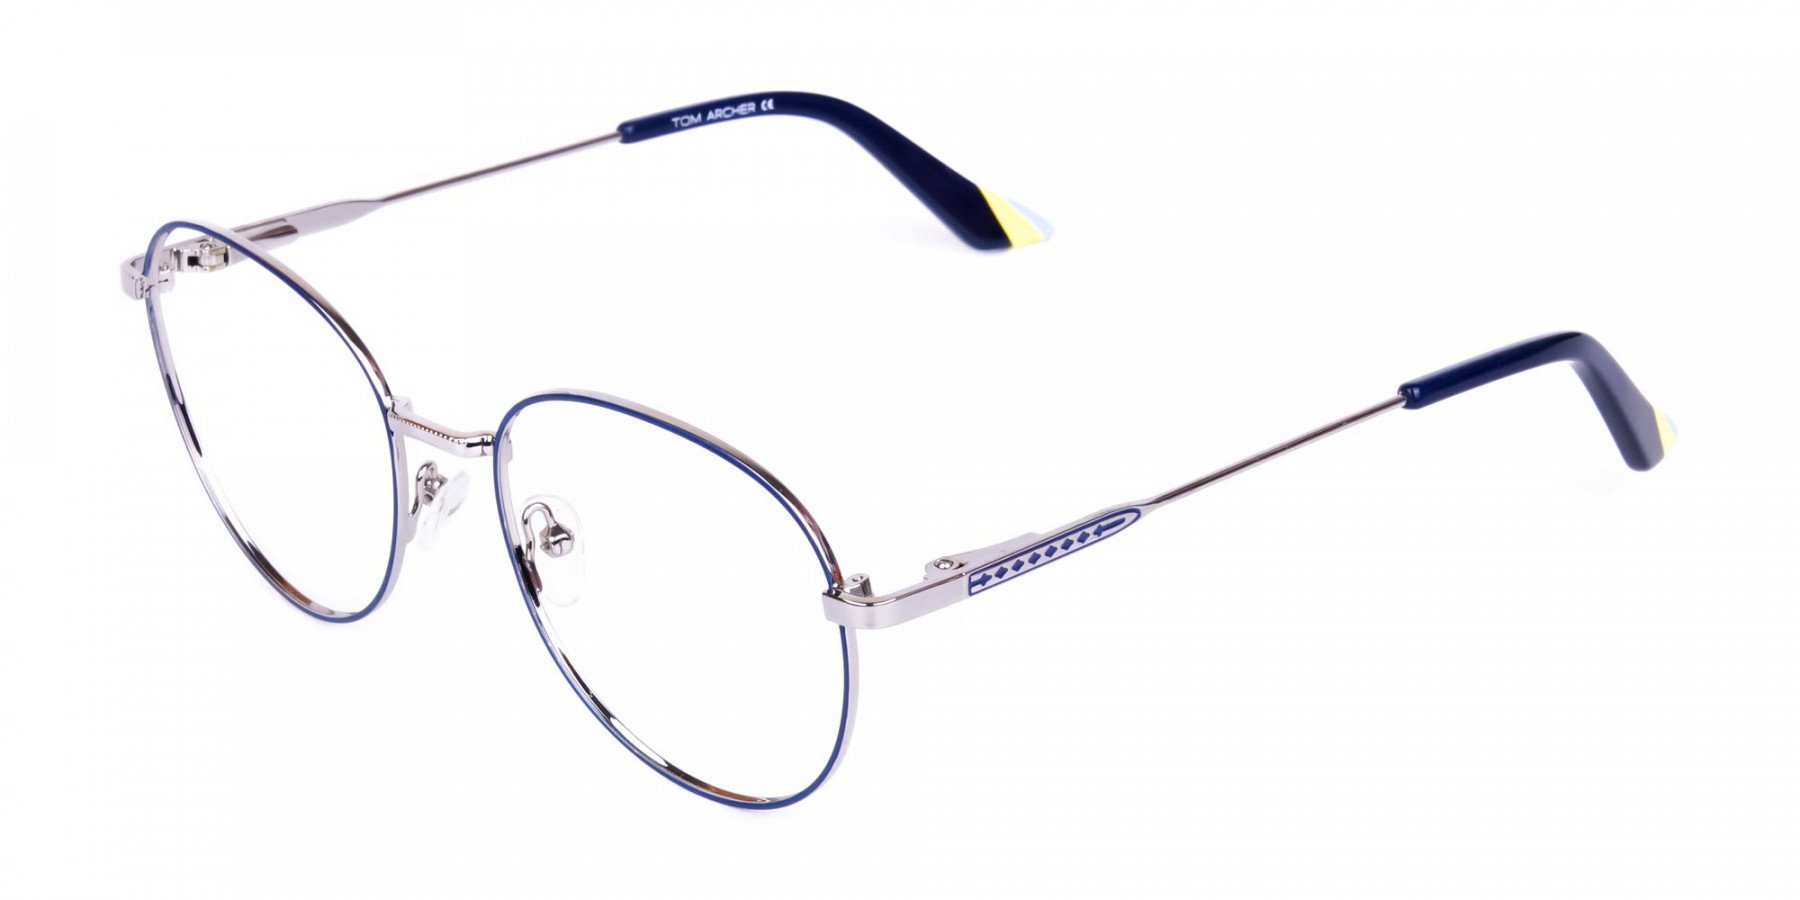 Navy-Blue-and-Silver-Metal-Round-Glasses-1